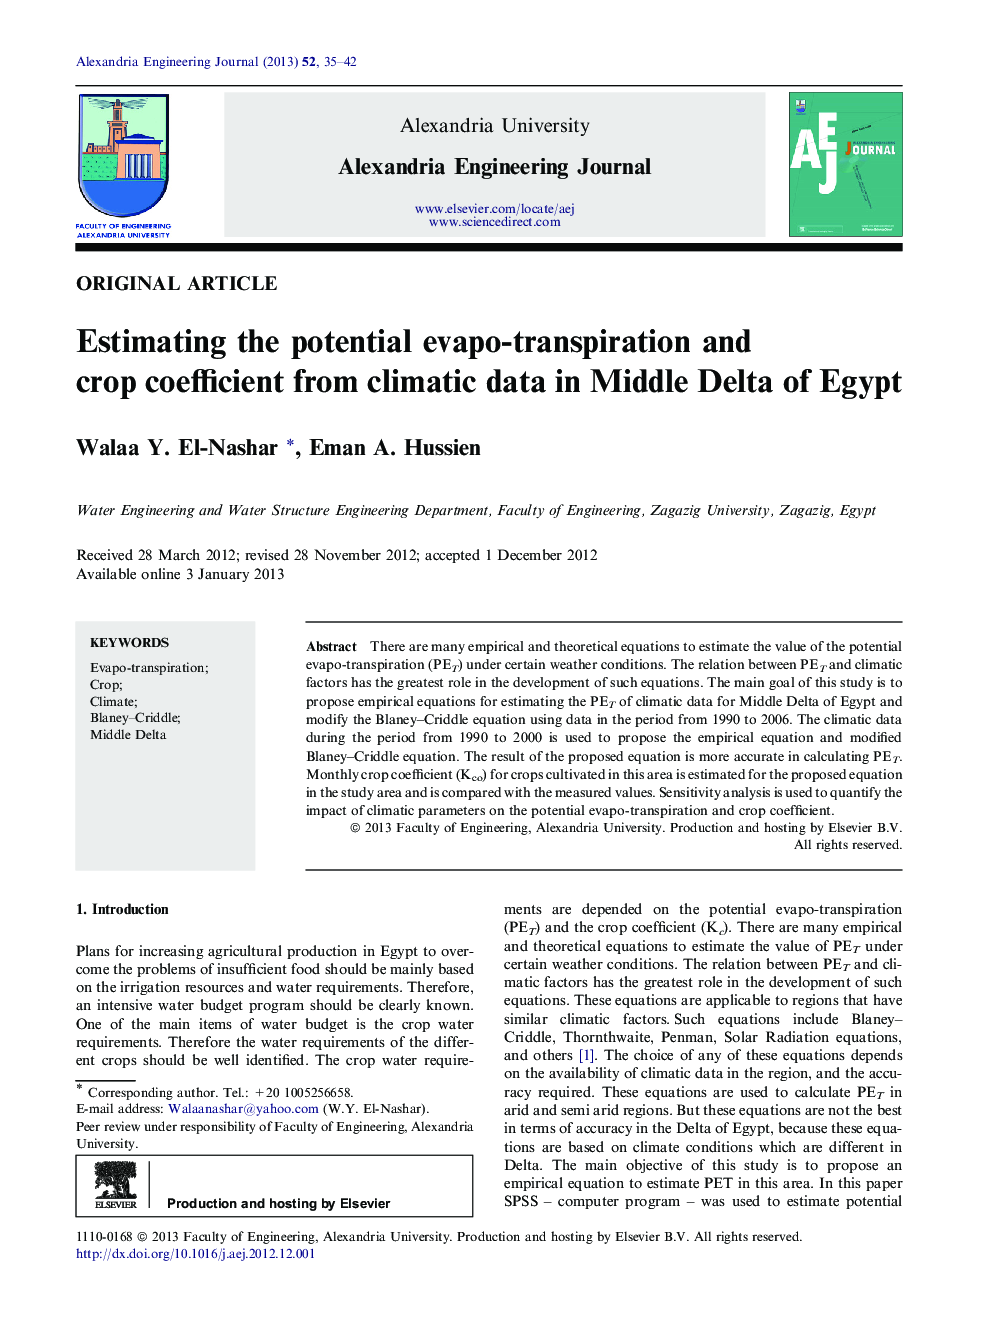 Estimating the potential evapo-transpiration and crop coefficient from climatic data in Middle Delta of Egypt 